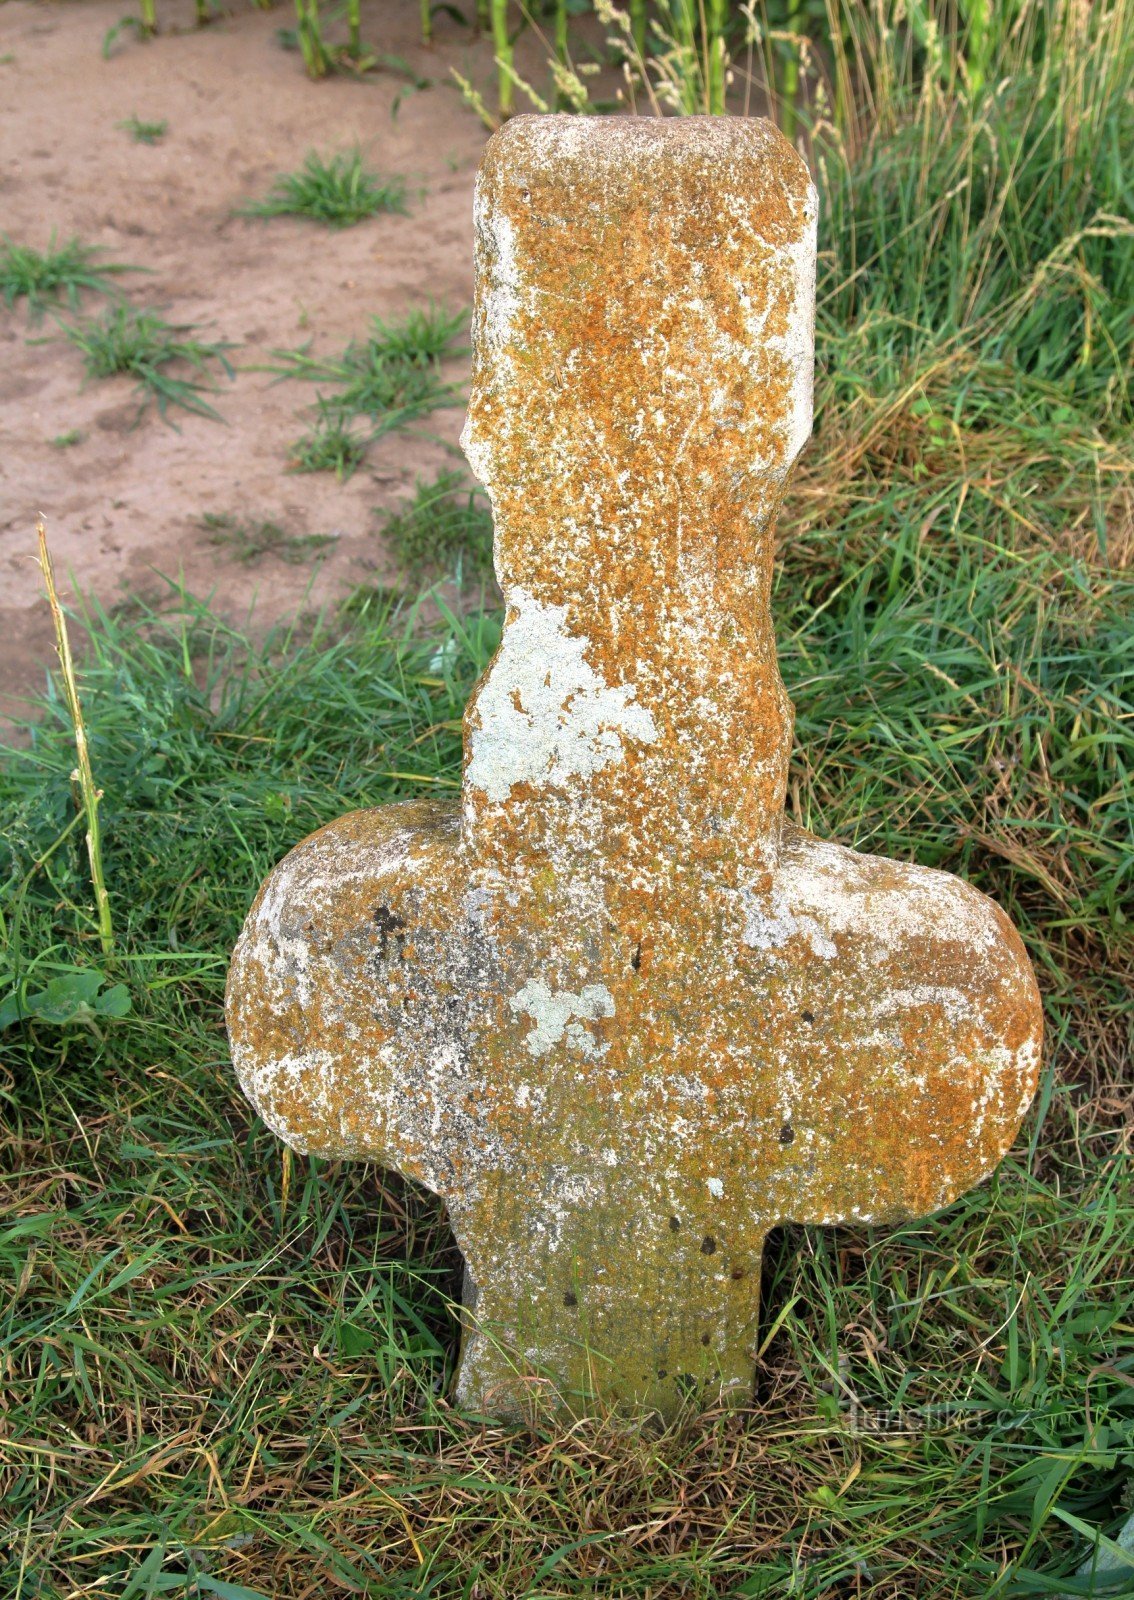 General view of the Reconciliation Cross